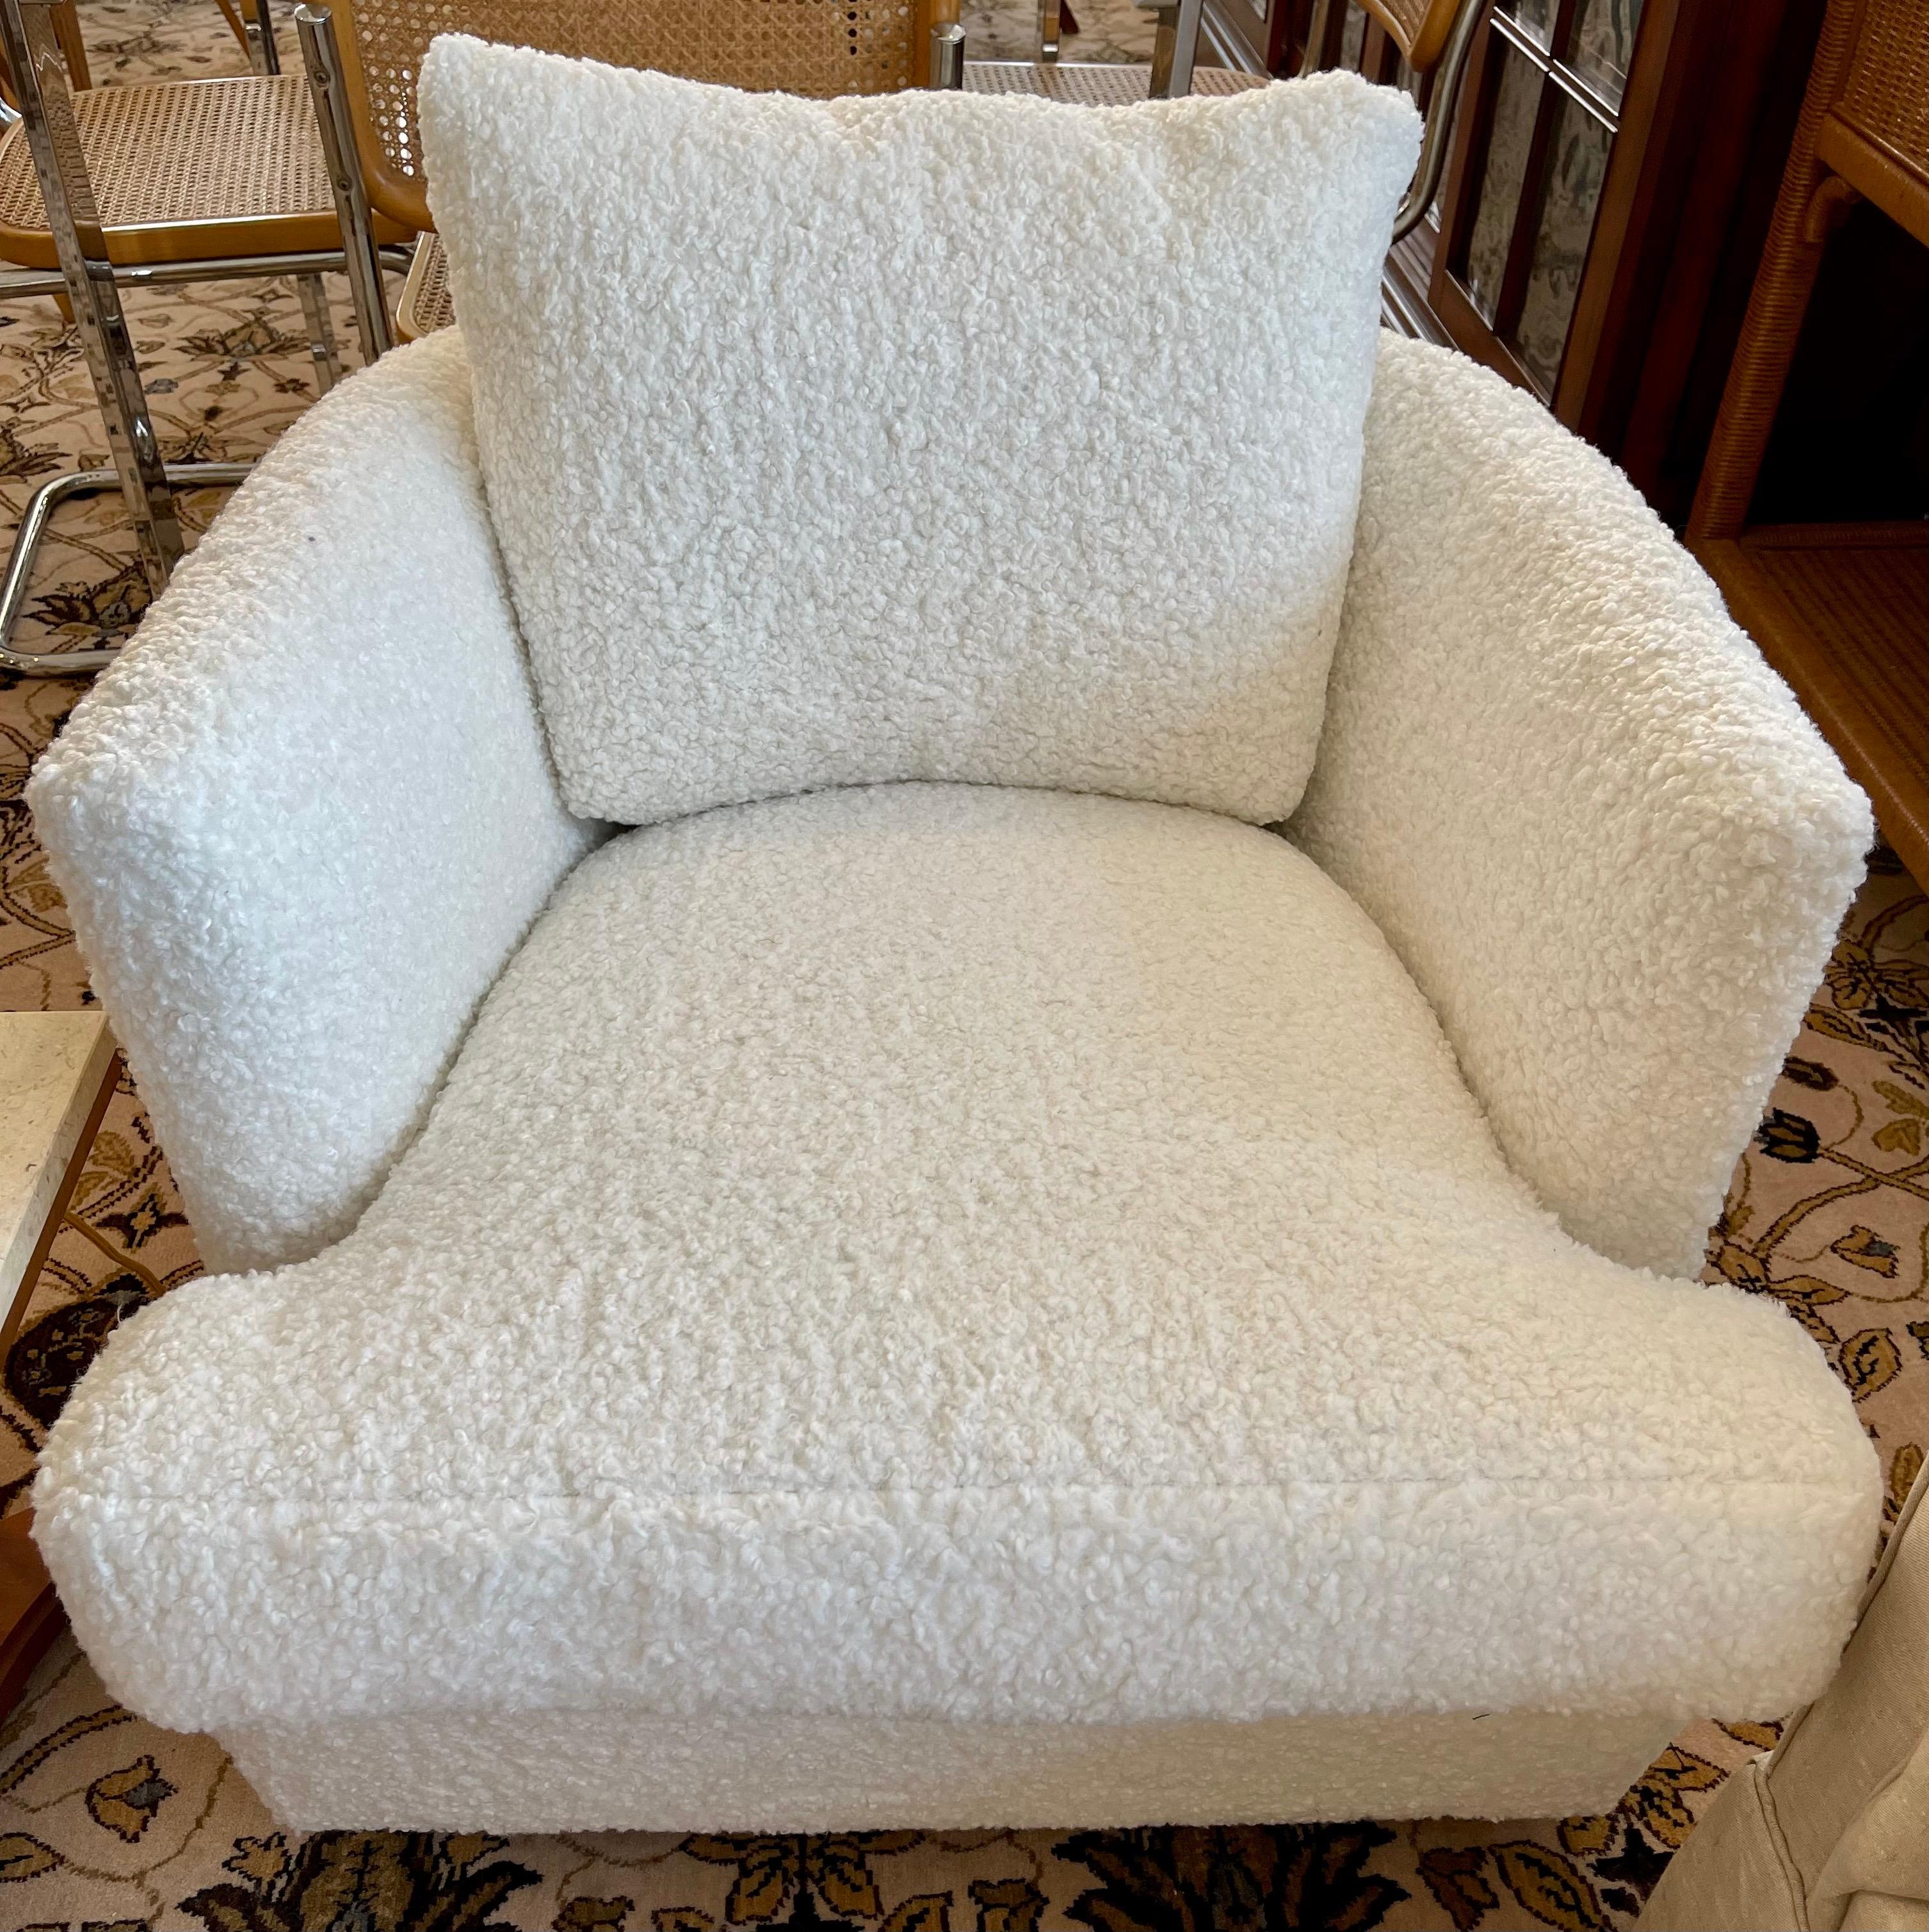 An iconic mid-century club chair with new boucle upholstery.
The chair sits on four rolling casters for ease of movement and have lines to die for. The scale is perfect for almost any room with its 32